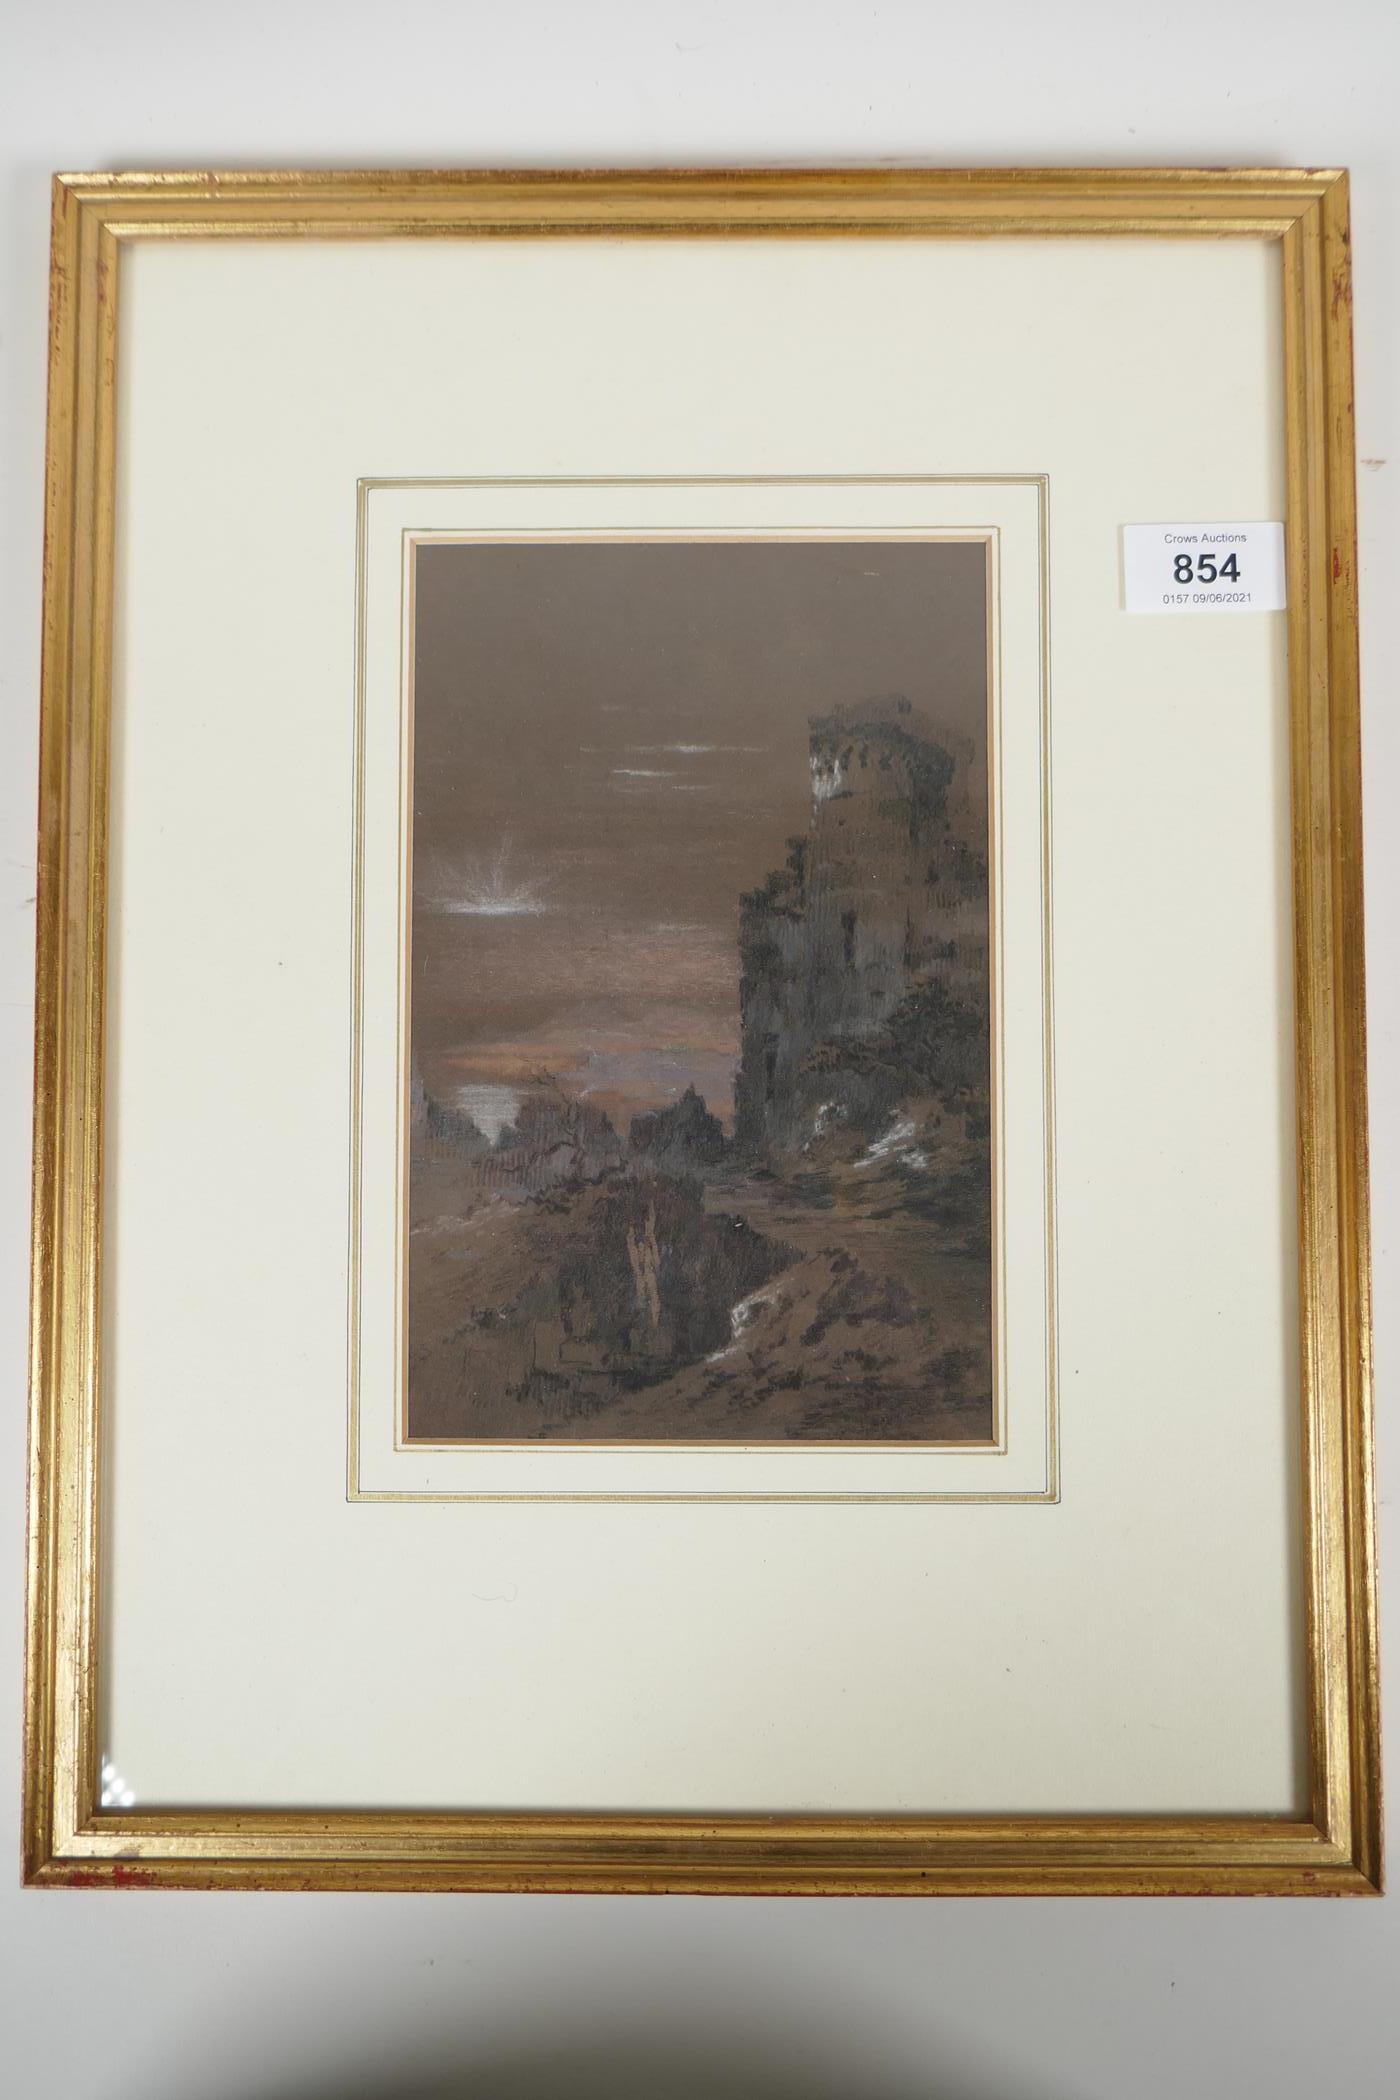 Ruins in a landscape at sunset, C19th charcoal drawing highlighted with white, in the manner of John - Image 3 of 3